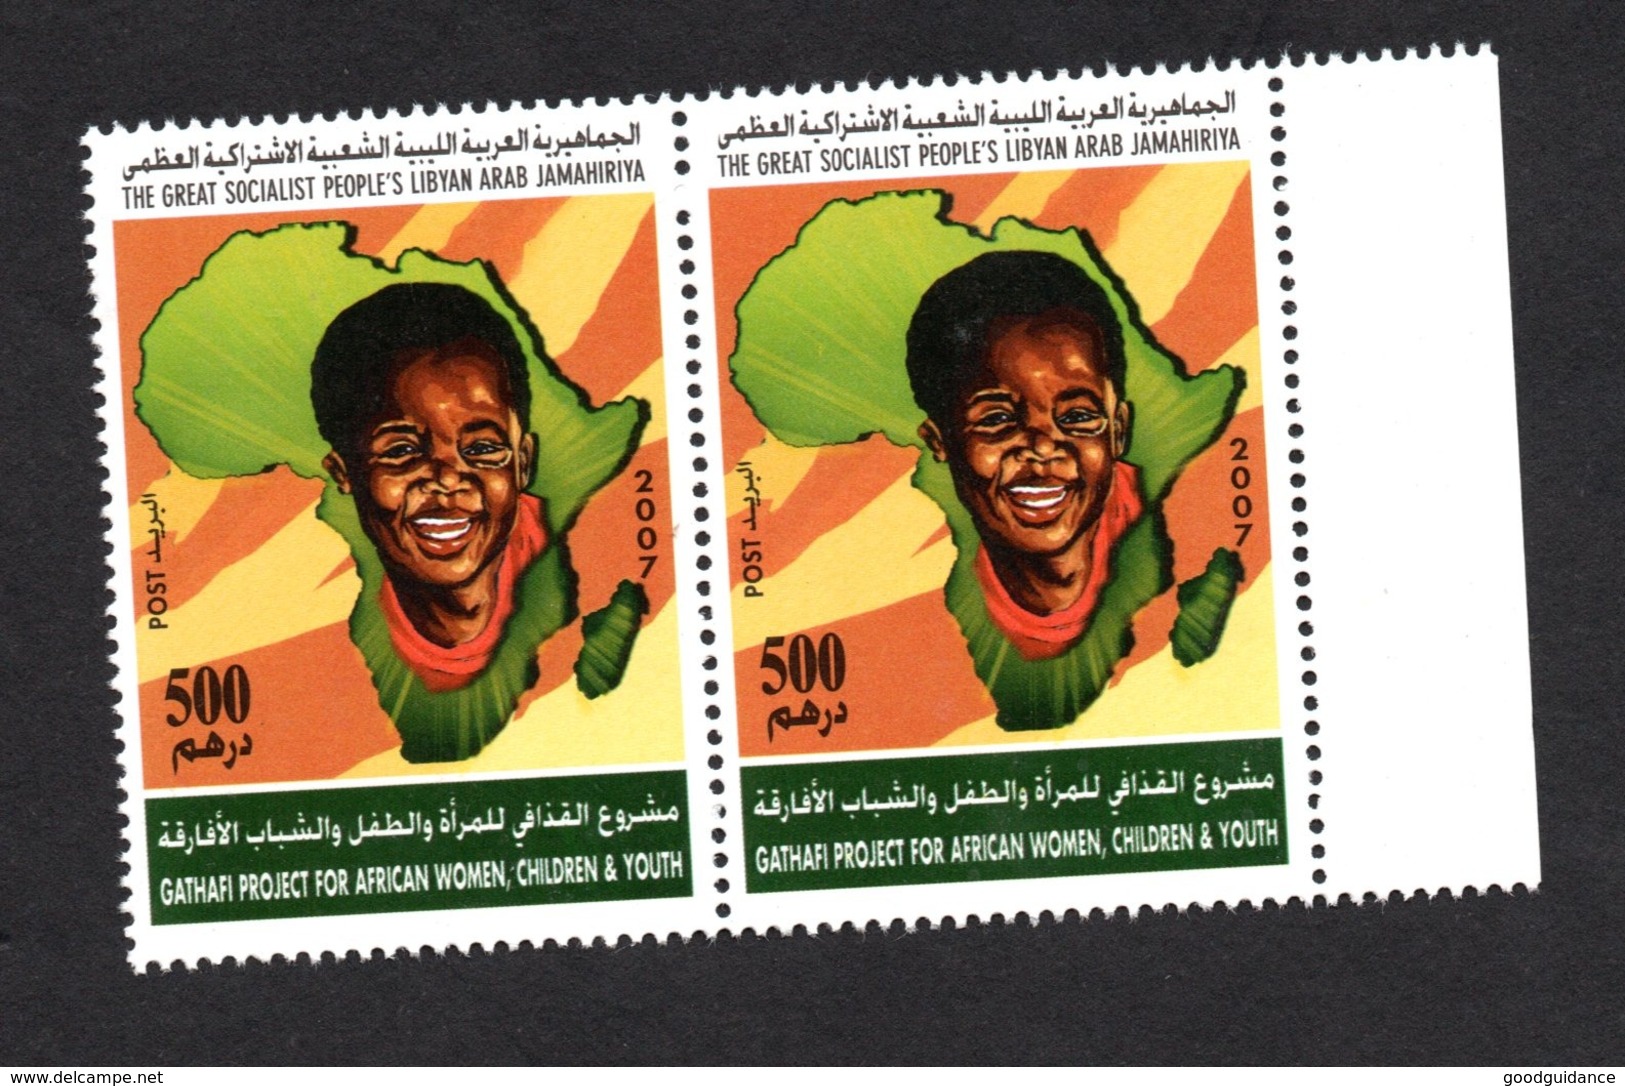 2007- Libya - Gaddafi Project For Health Care And Economic Challenge Of African Women, Children And Youth - Pair MNH** - Libia